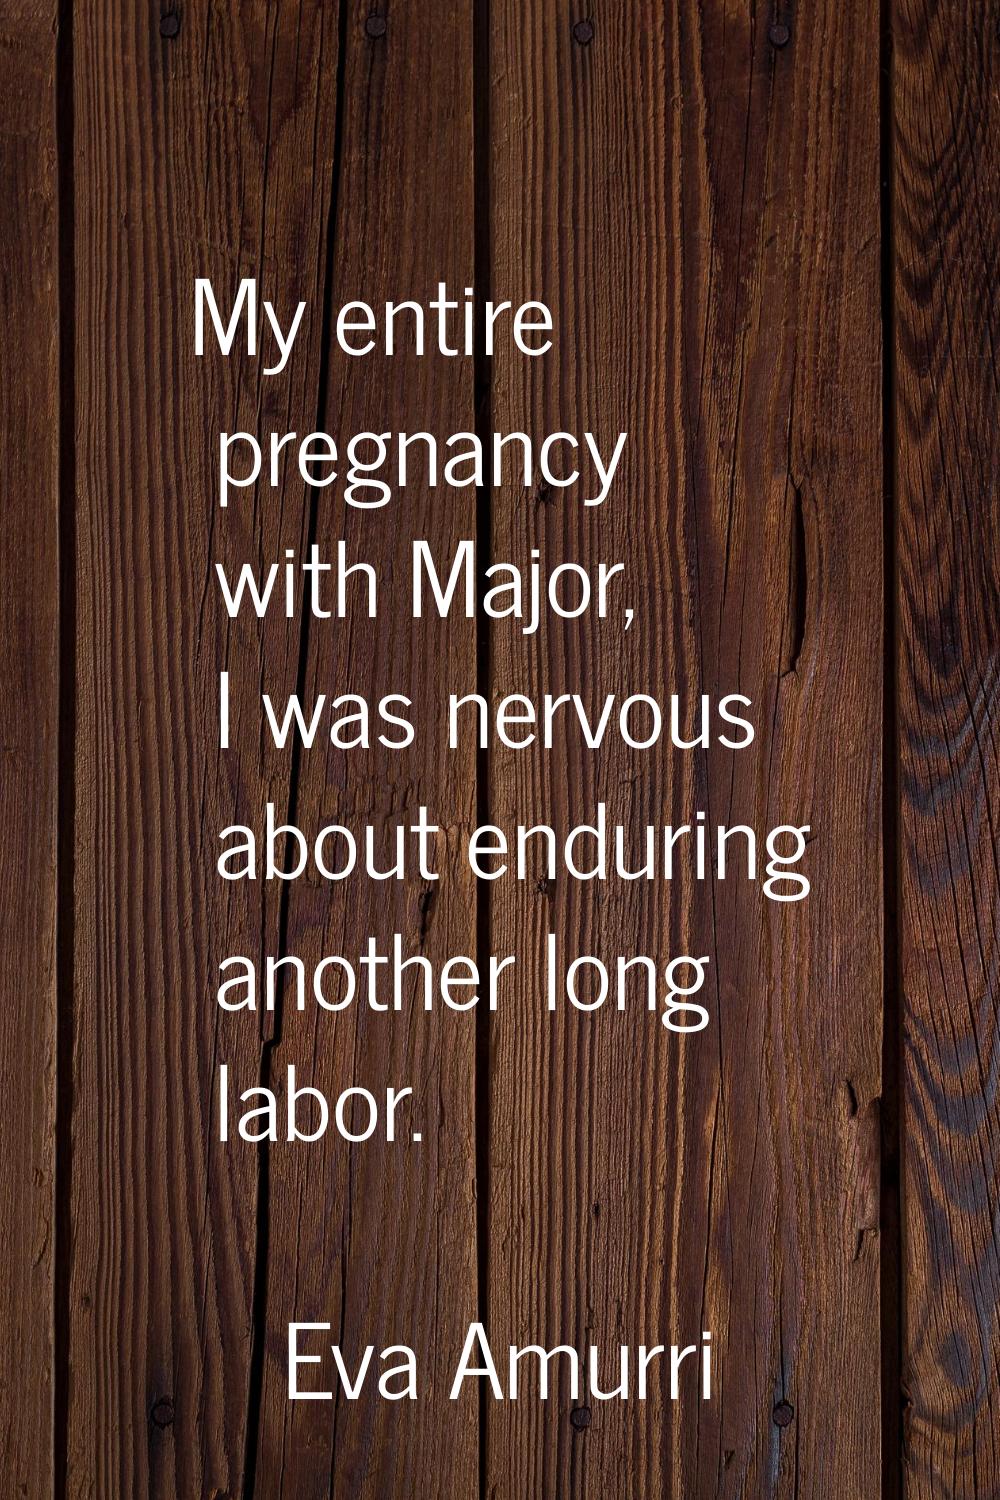 My entire pregnancy with Major, I was nervous about enduring another long labor.